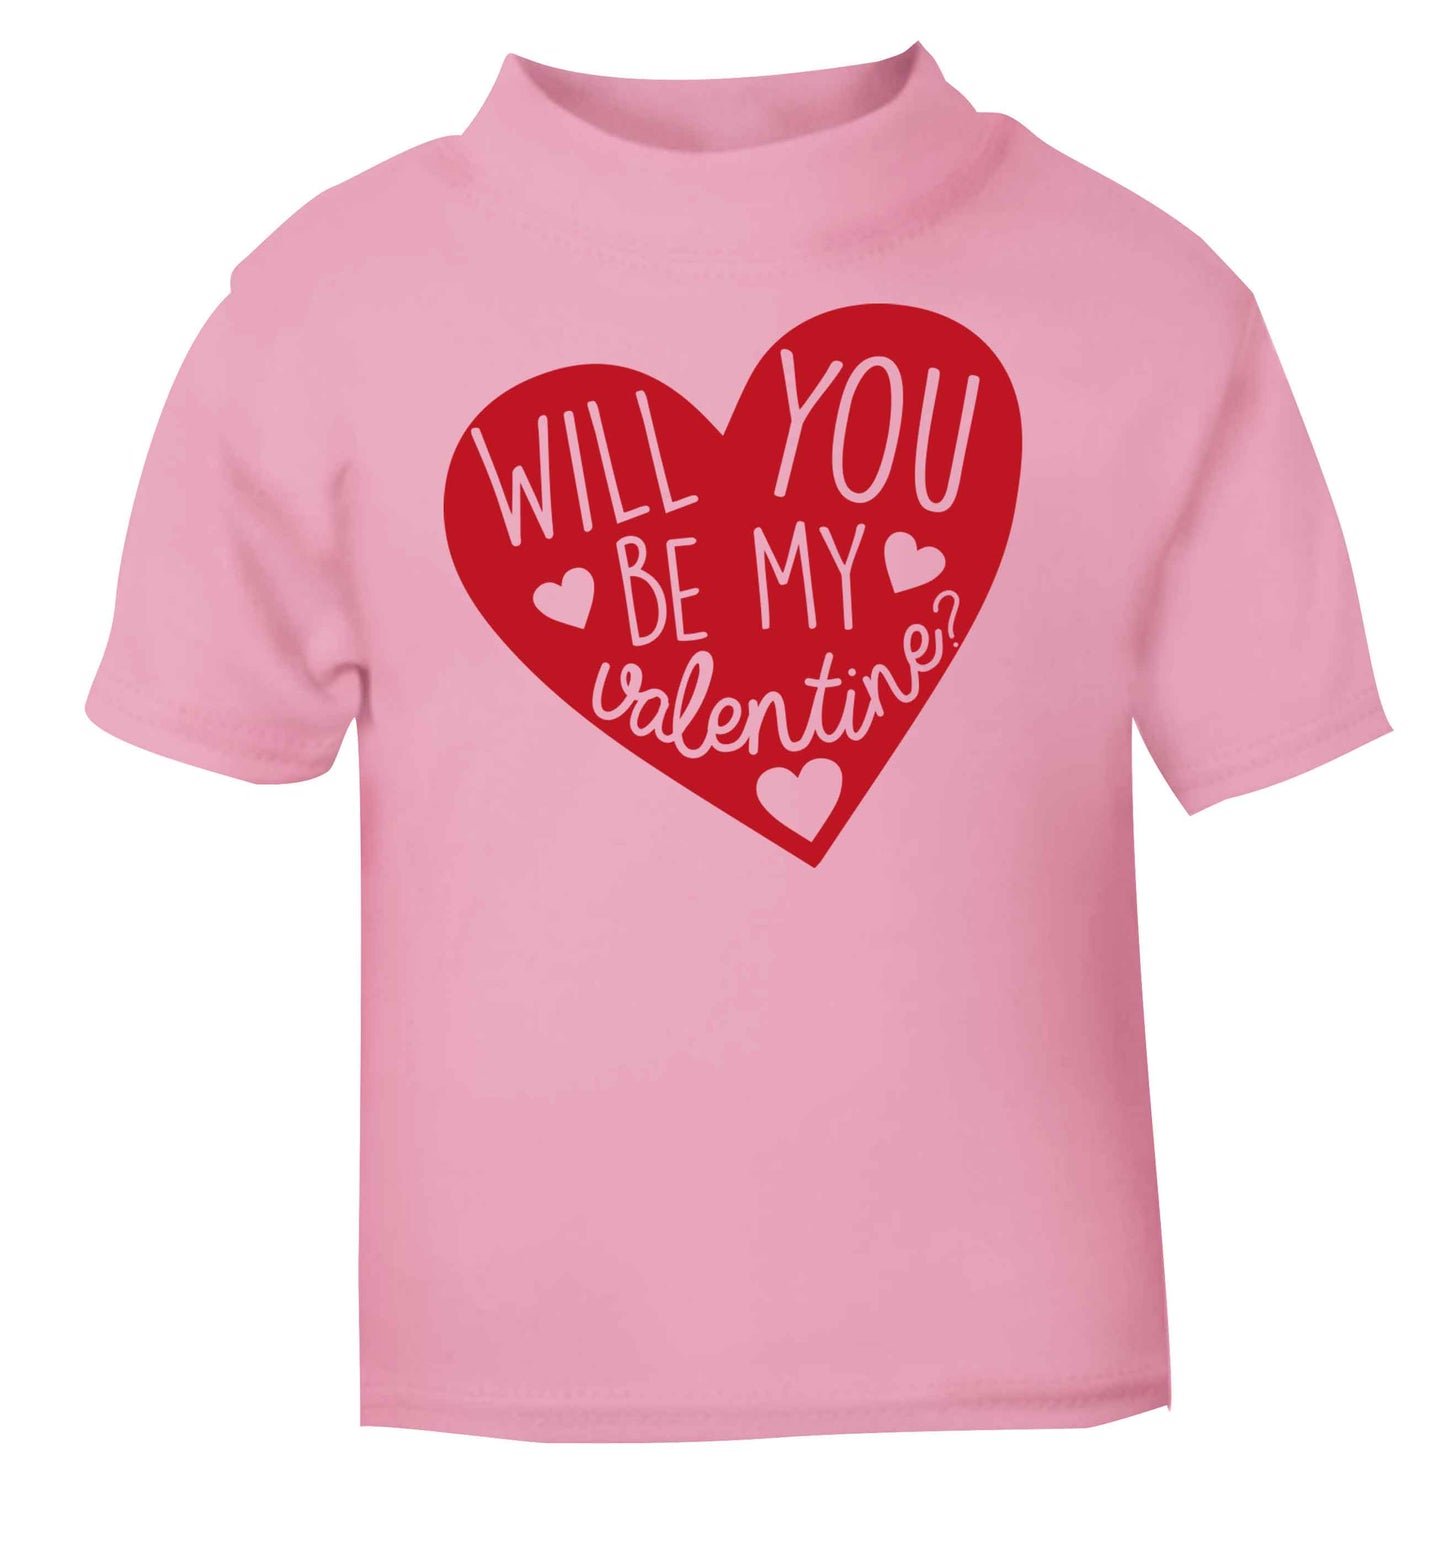 Will you be my valentine? light pink baby toddler Tshirt 2 Years